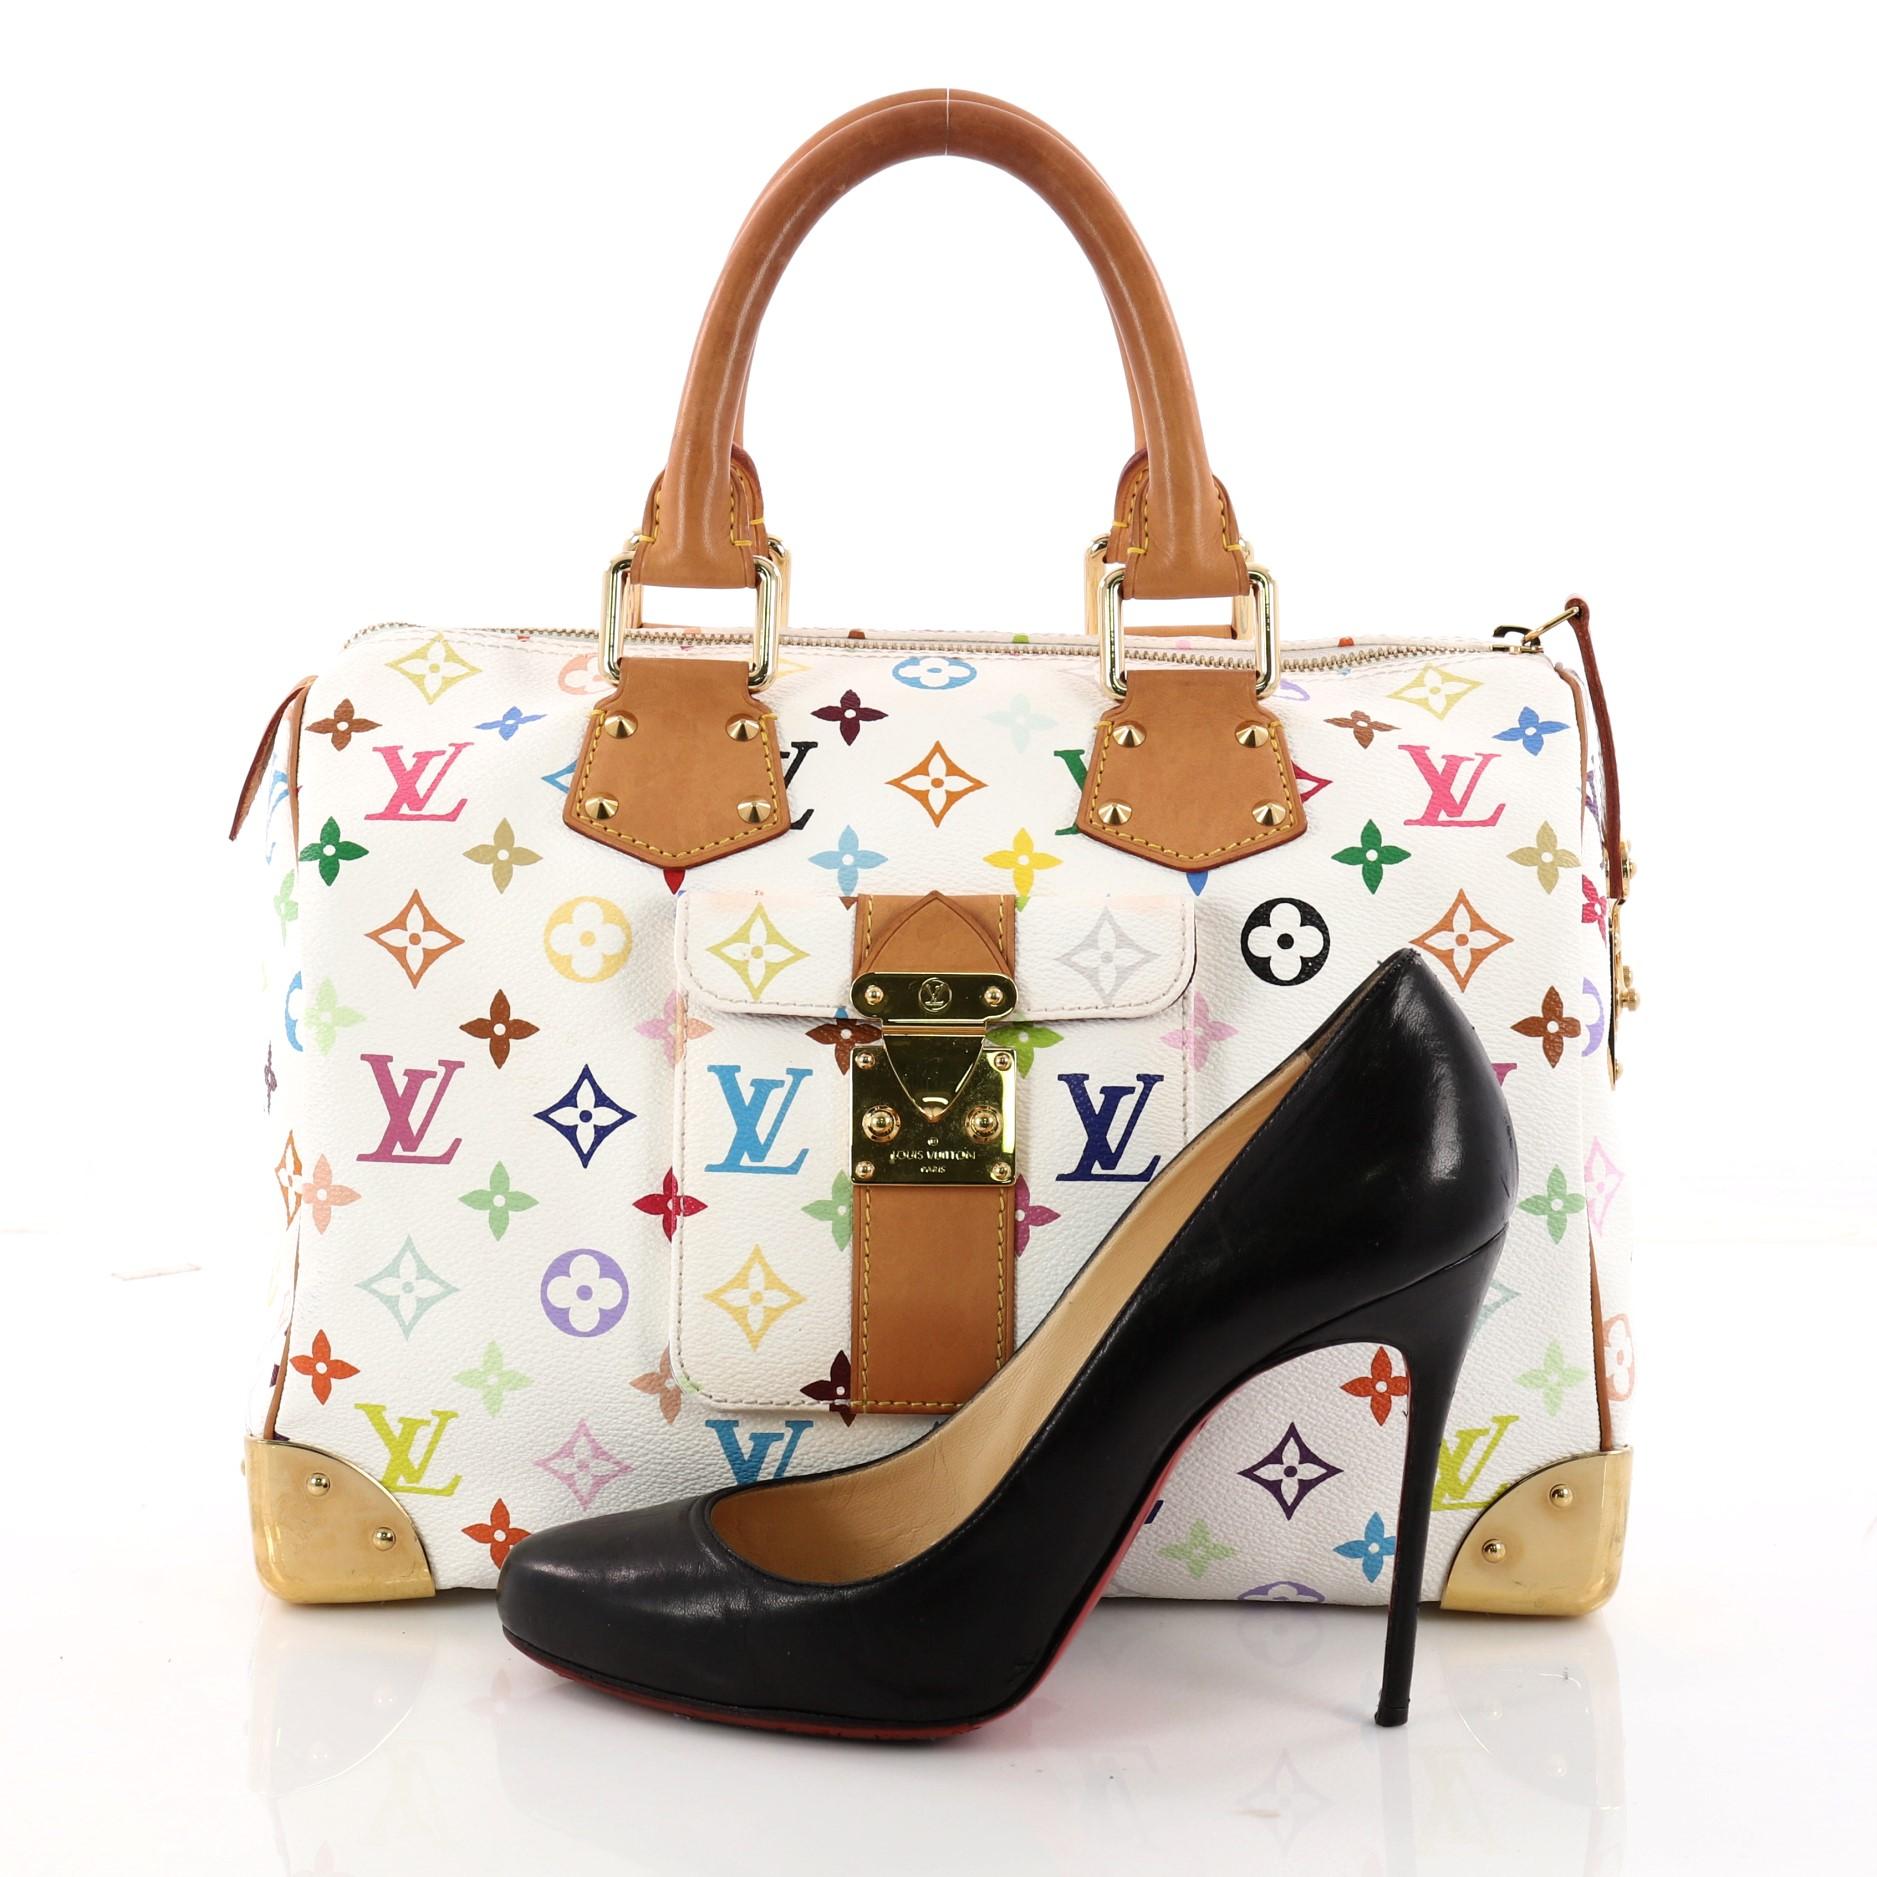 This authentic Louis Vuitton Speedy Handbag Monogram Multicolor 30 is vibrant and elegant, made for a sophisticated traveling fashionista. Crafted from Louis Vuitton’s signature white monogram multicolor coated canvas, this iconic bag features